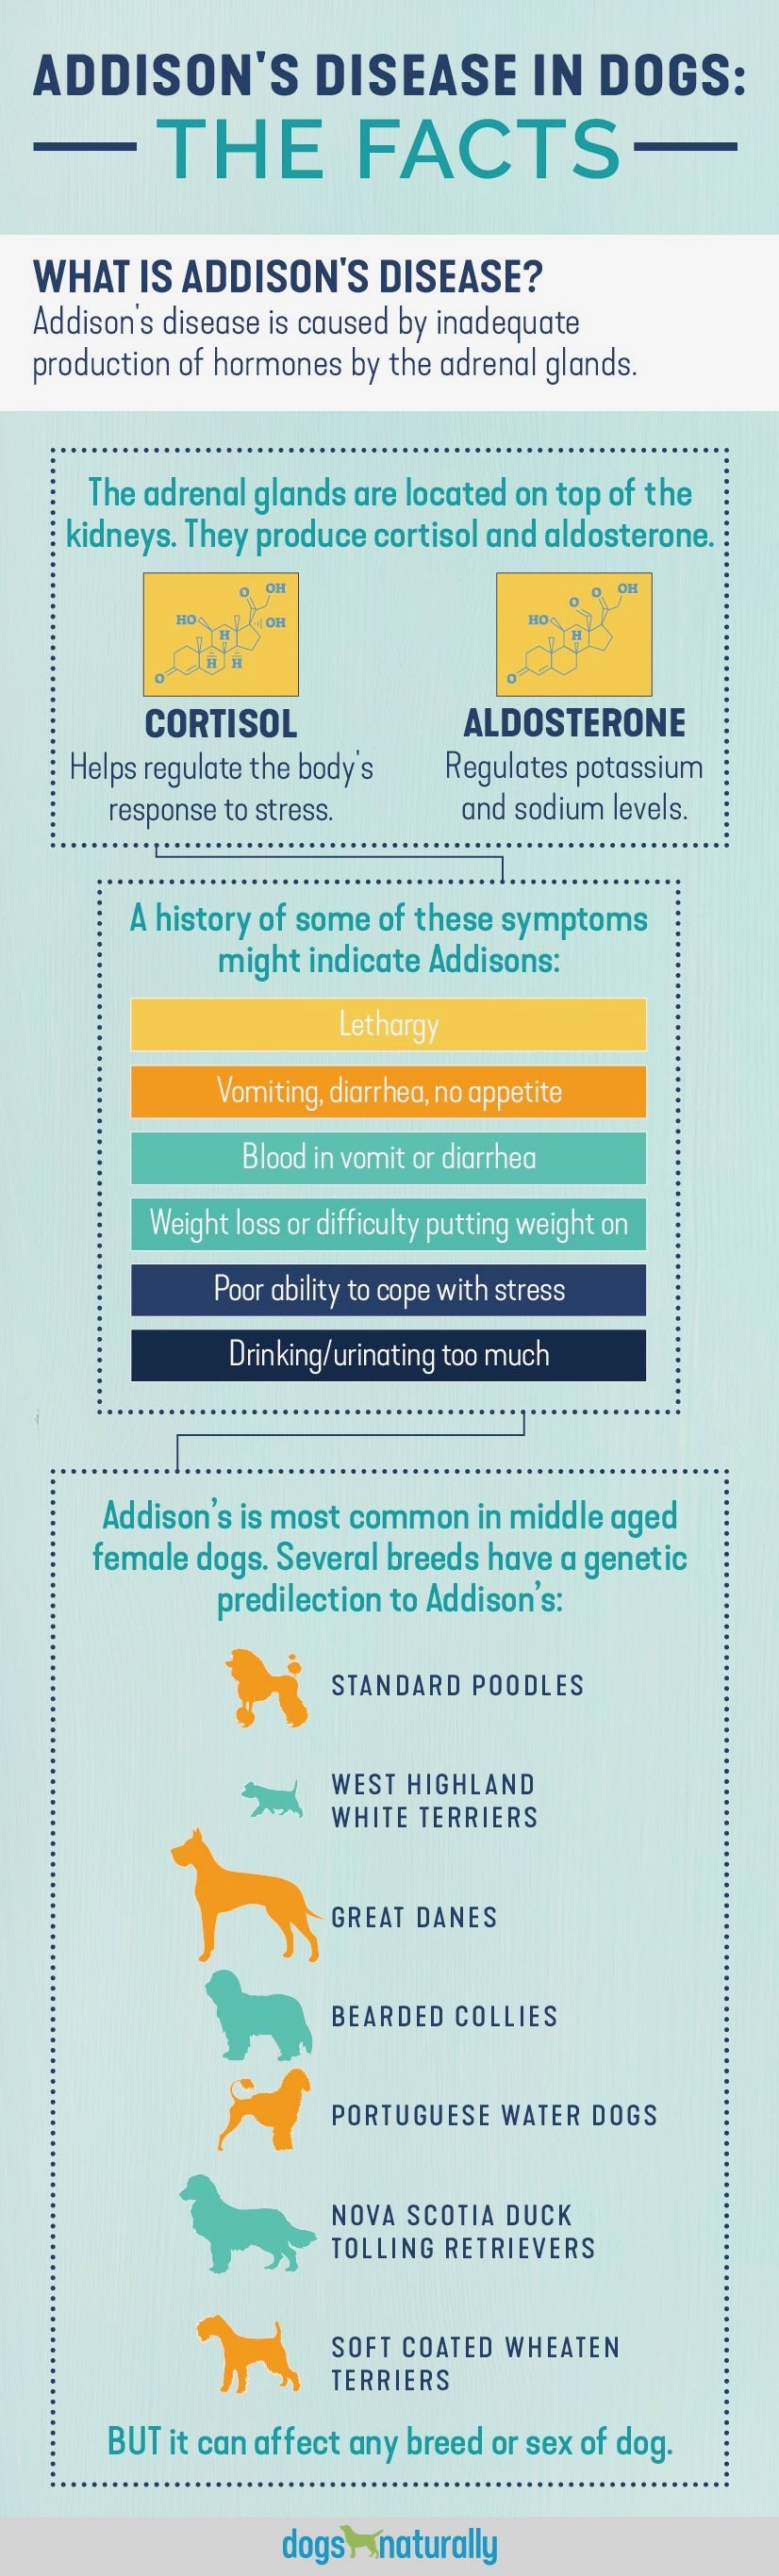 Facts of Addison's disease in dogs